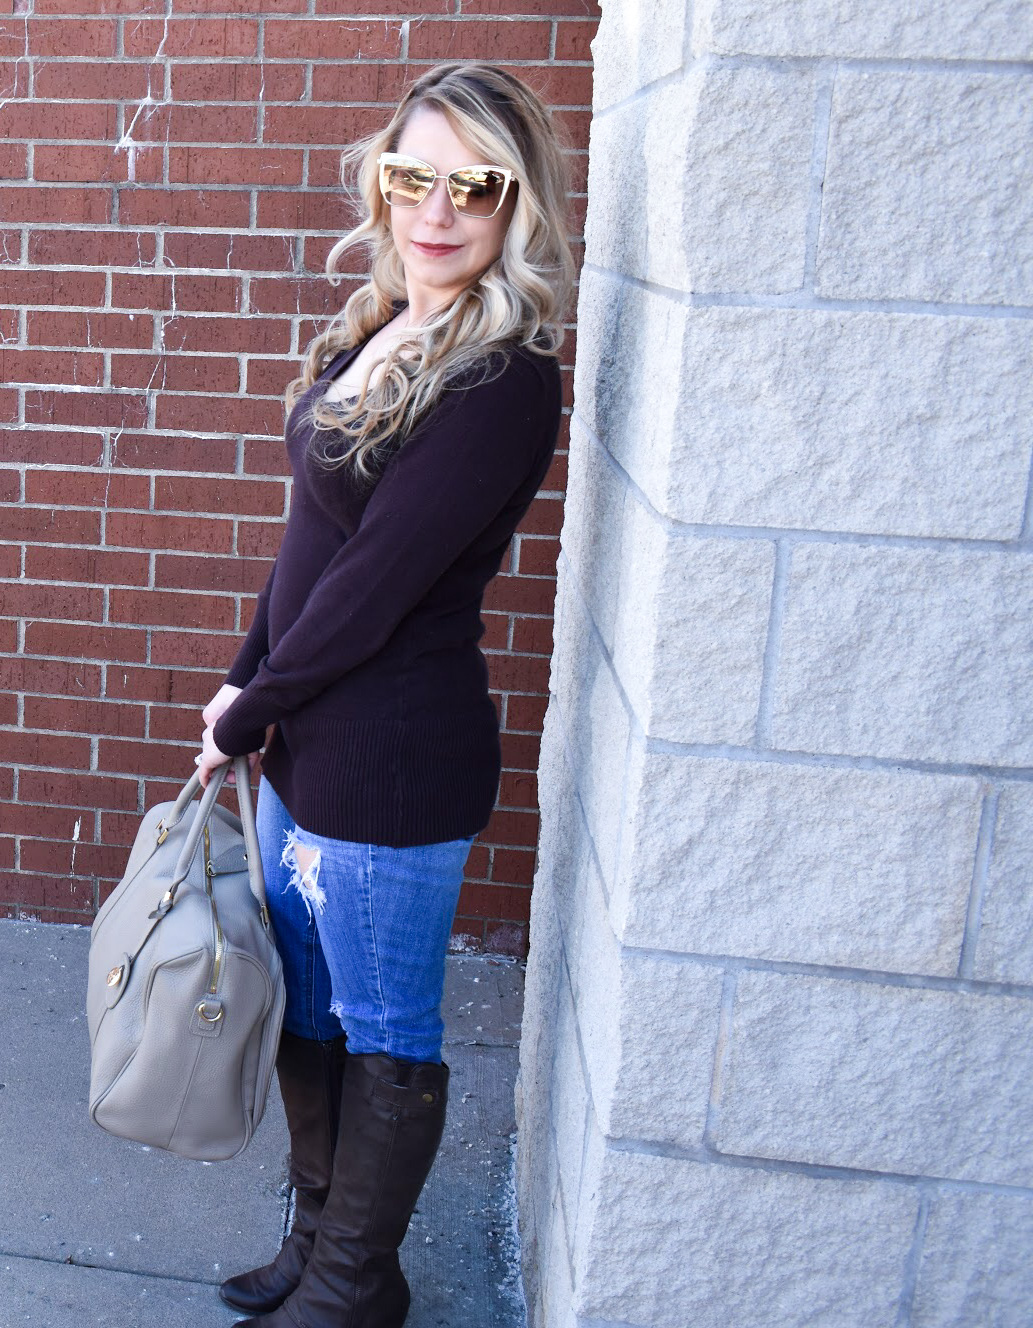 Brown Sweater and Ripped Denim: We're in the midst of a never-ending winter in Kansas City [ugh, Kansas weather!], so, as a Kansas City fashion blogger, I'm sharing one of my favorite winter fashion looks to get your wardrobe through until spring hits! You can't go wrong with a classic brown v-neck sweater, and the ripped jeans give this outfit a bit of edge. Of course, no mom outfit is complete without a stylish diaper bag!